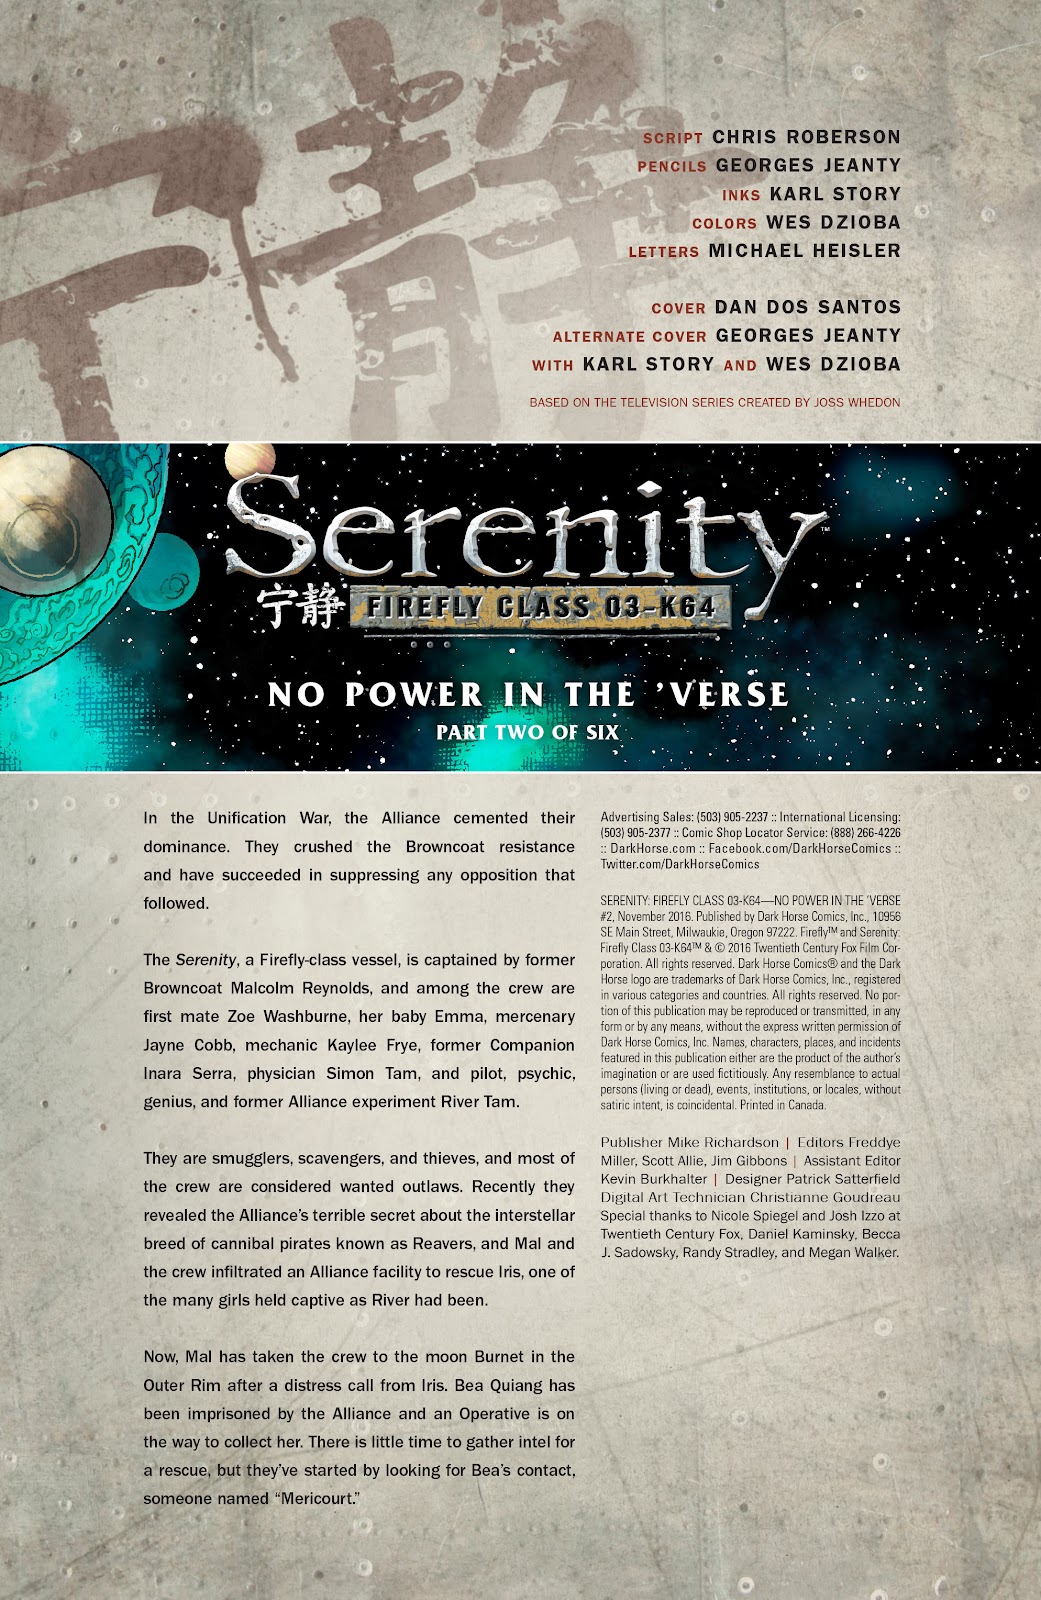 Serenity: Firefly Class 03-K64 – No Power in the 'Verse issue 2 - Page 3